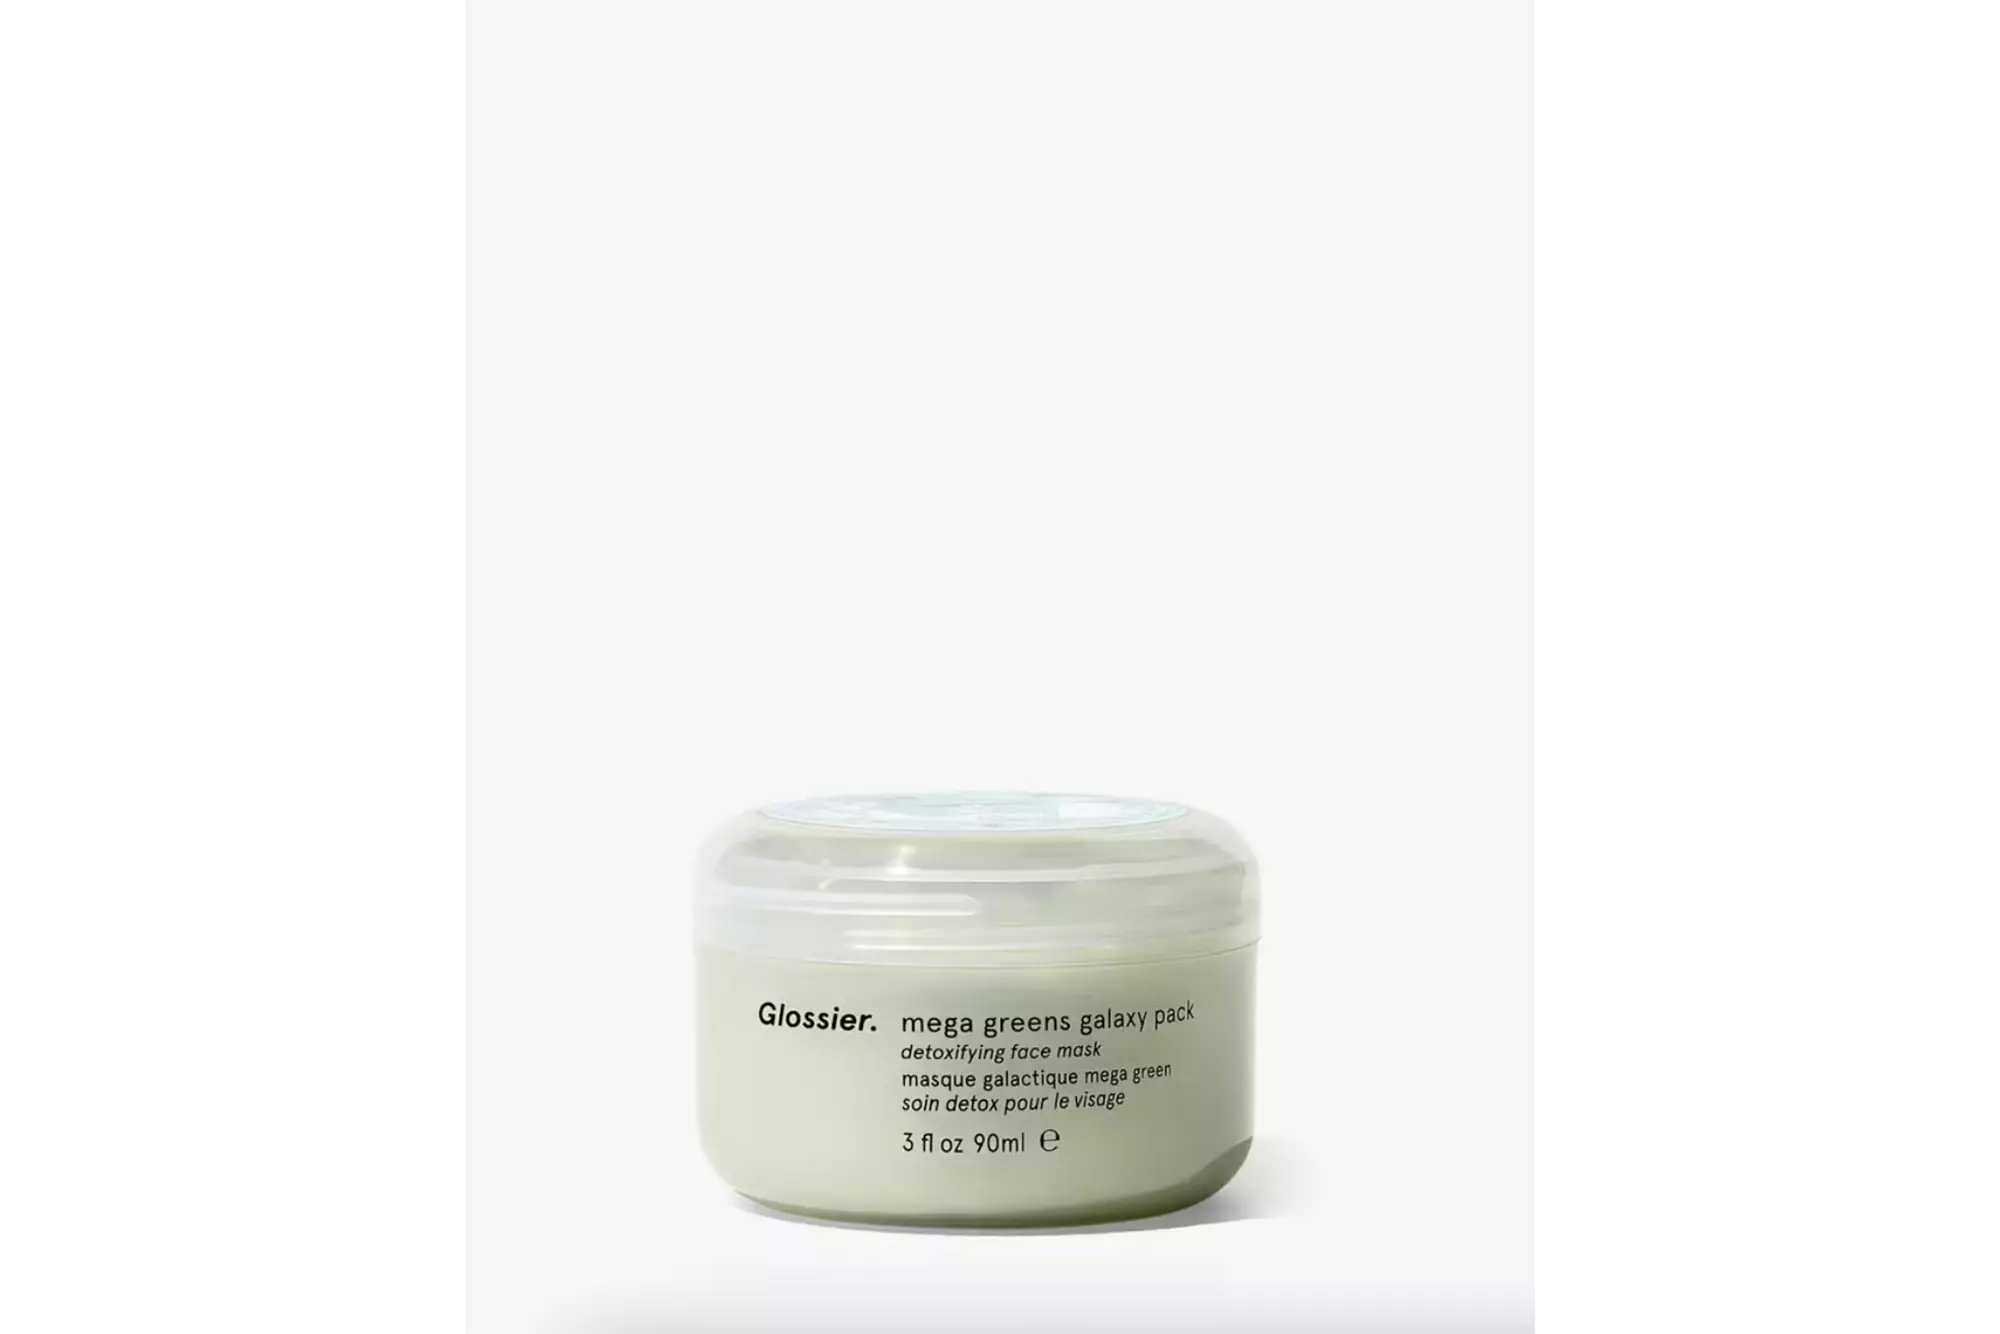 Glossier Moisturizing Moon Mask Soothing Face Treatment